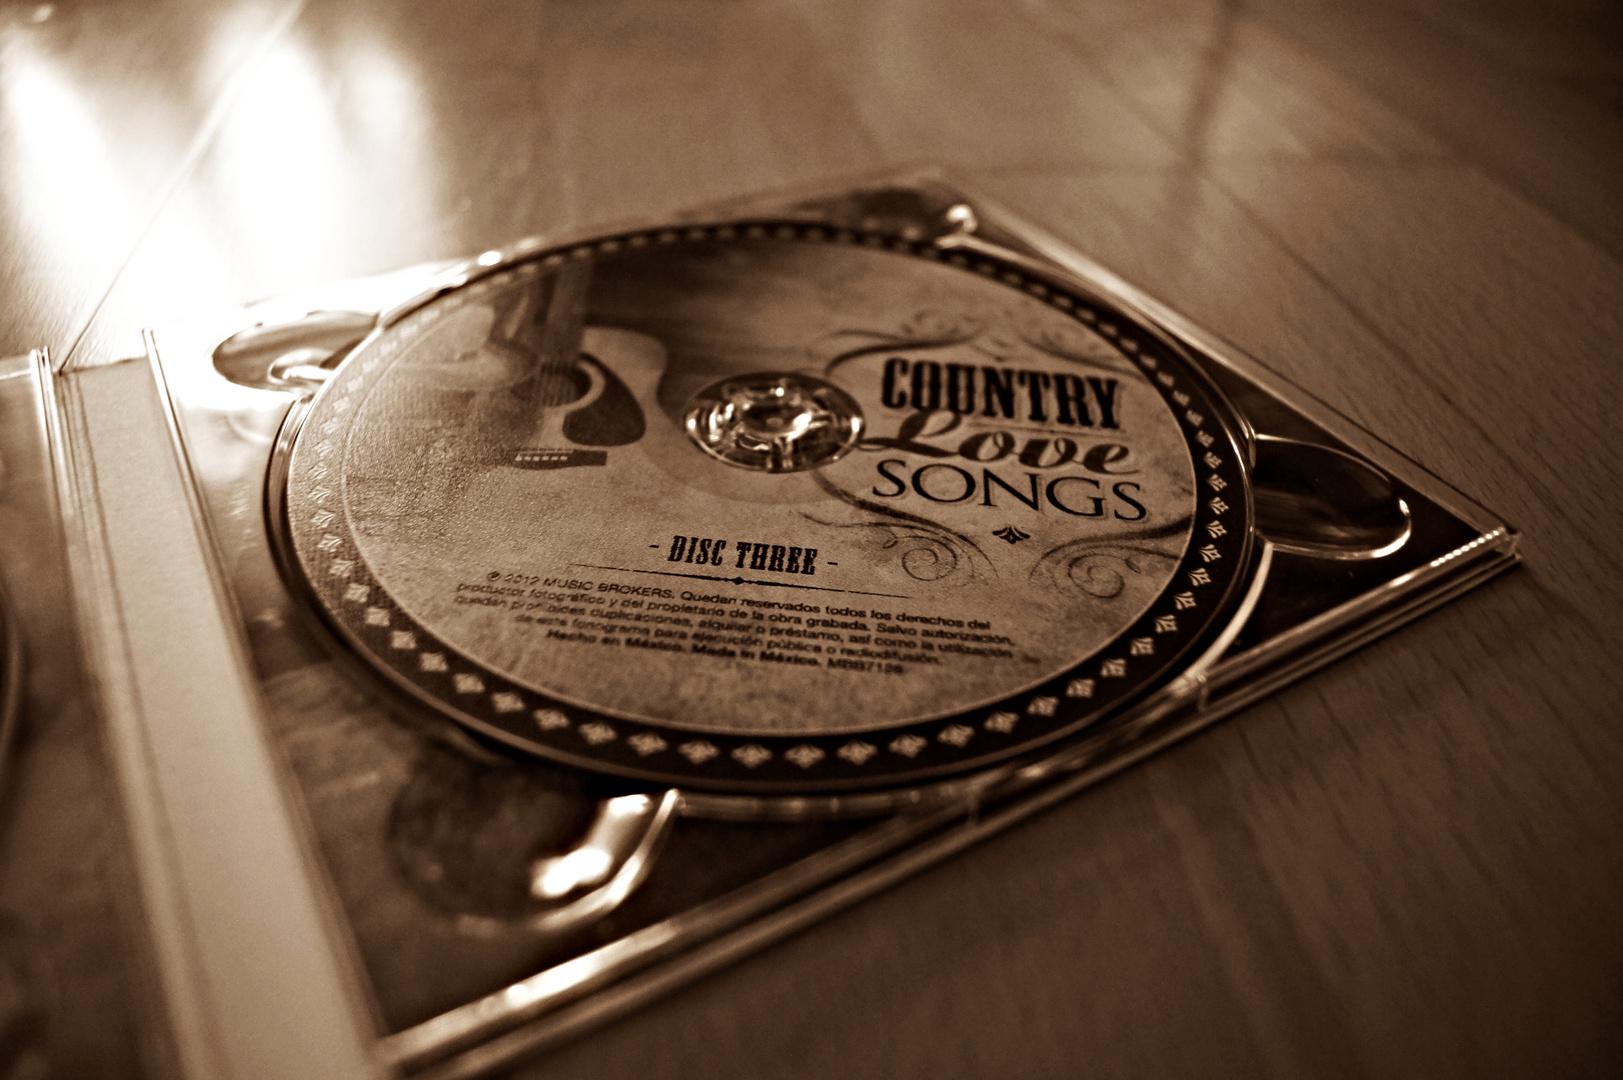 Country love songs